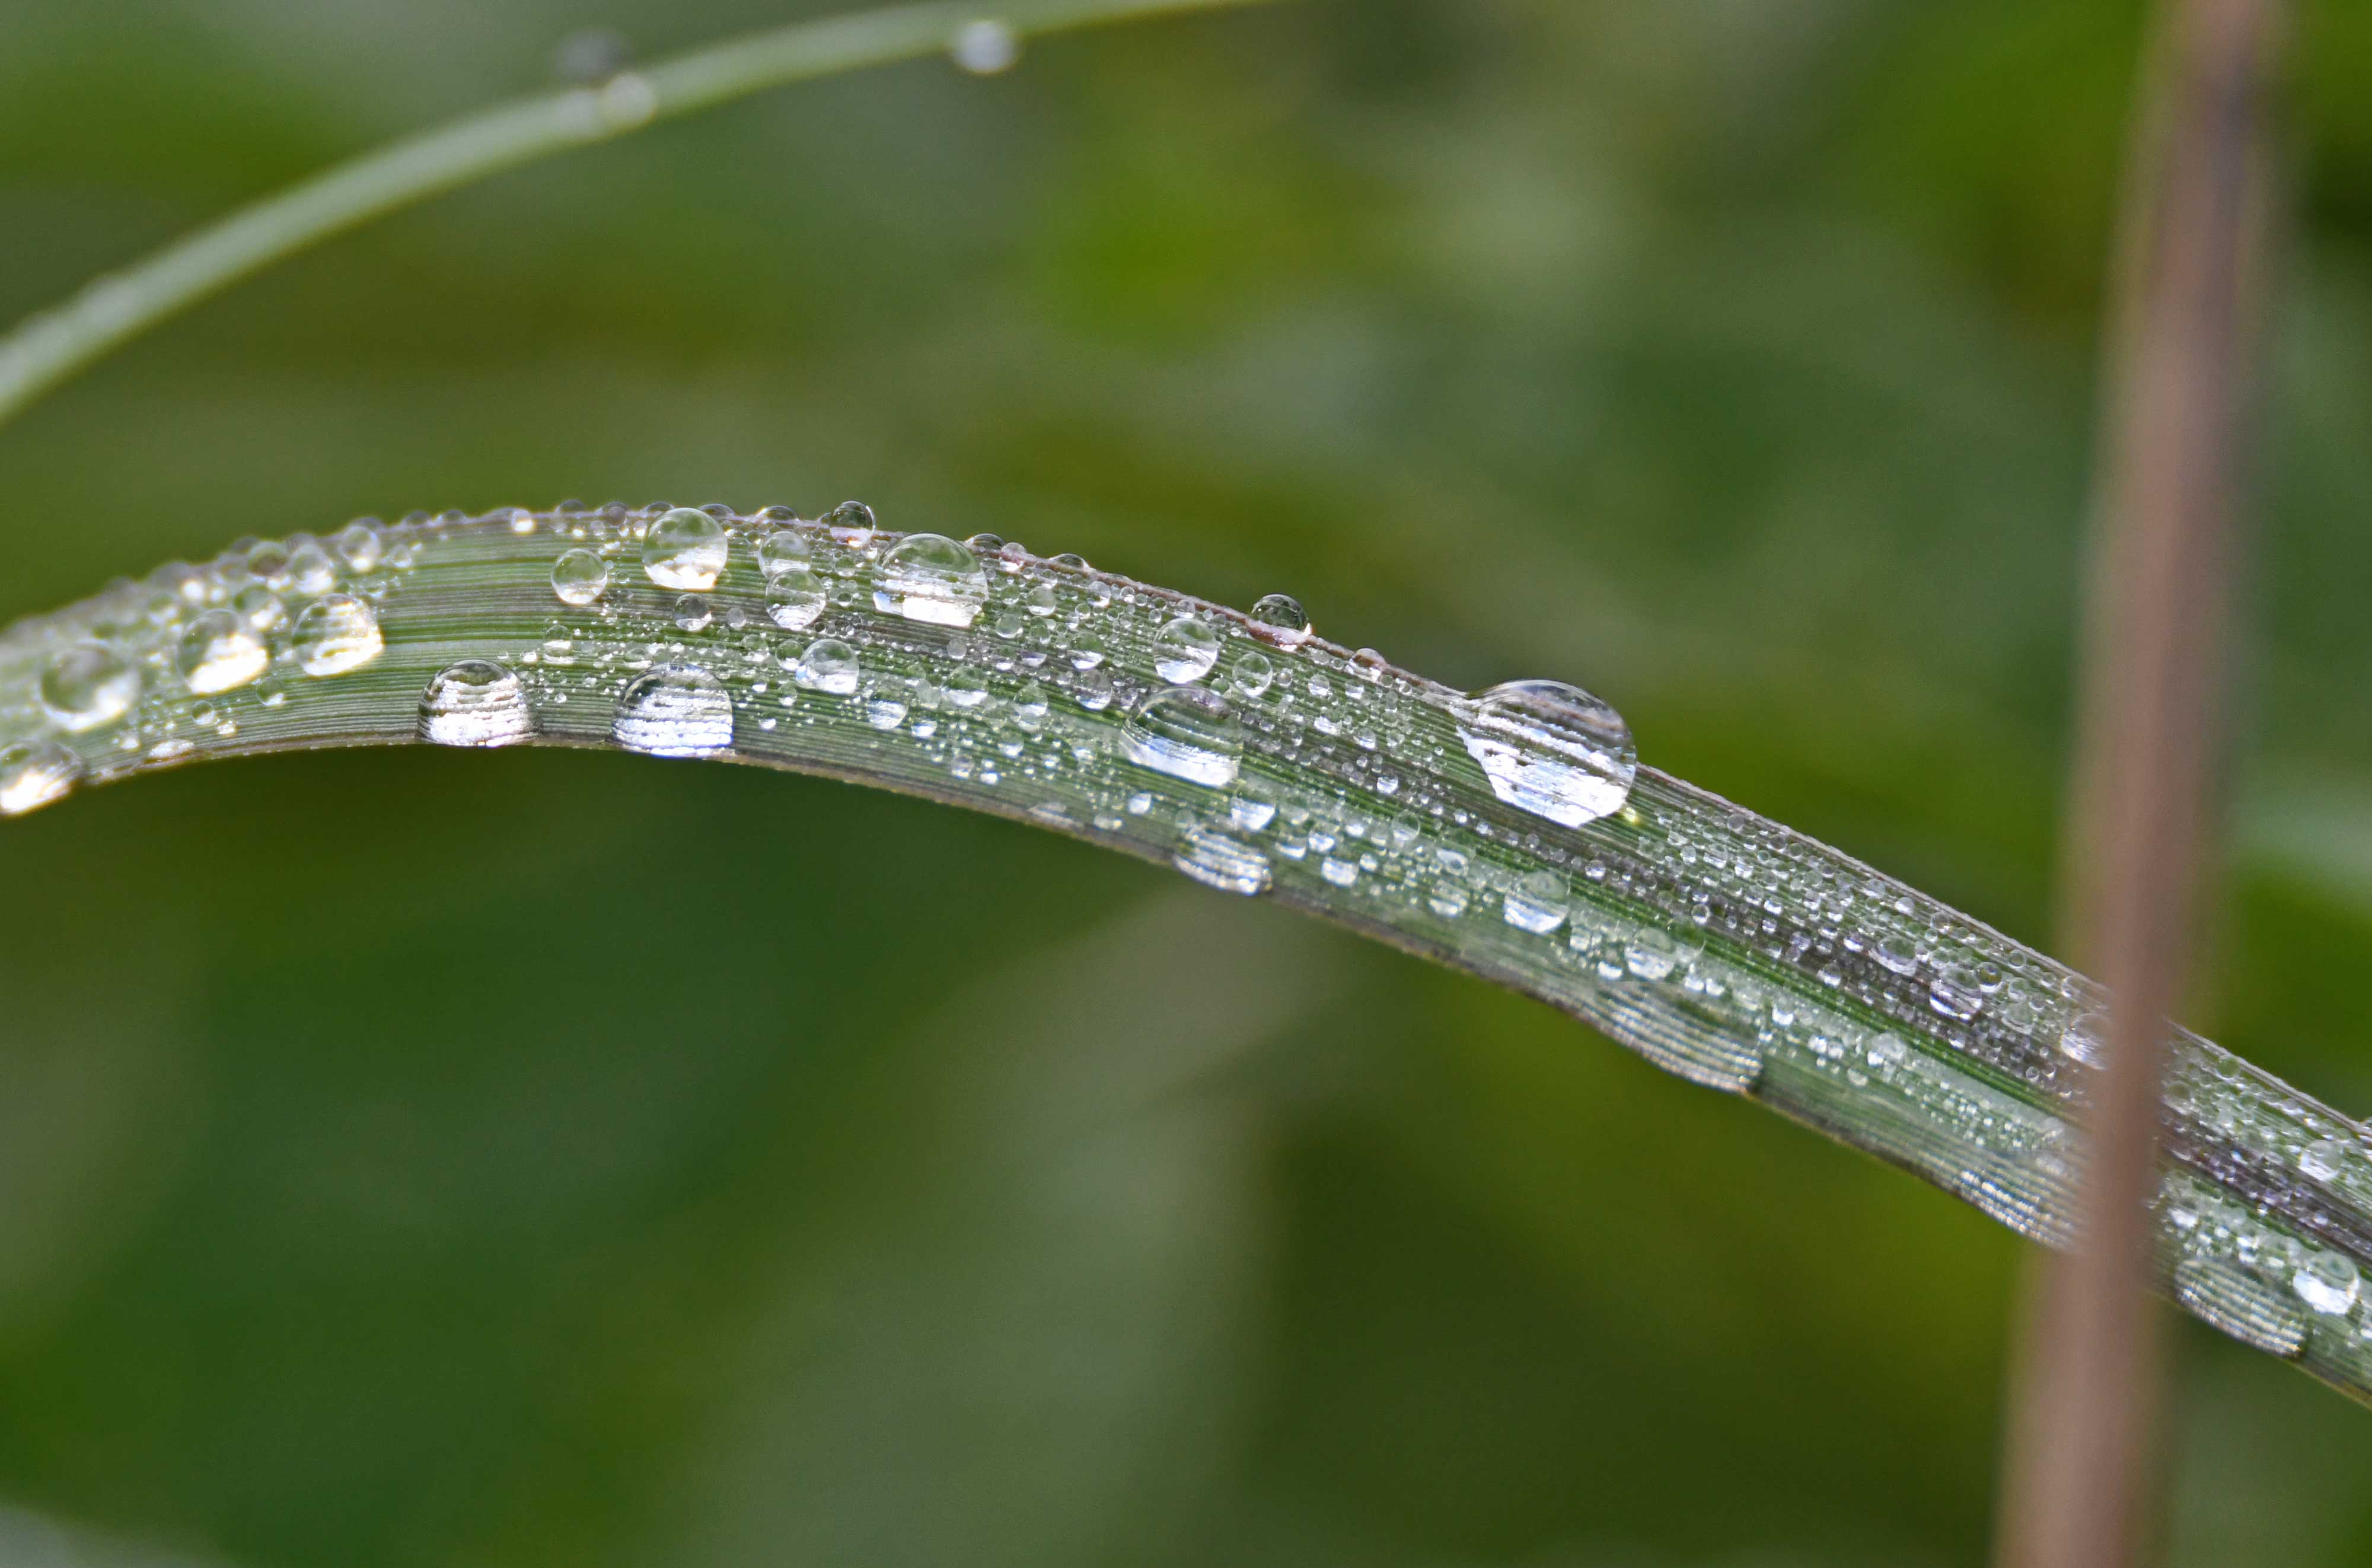 Dew drops on a blade of grass